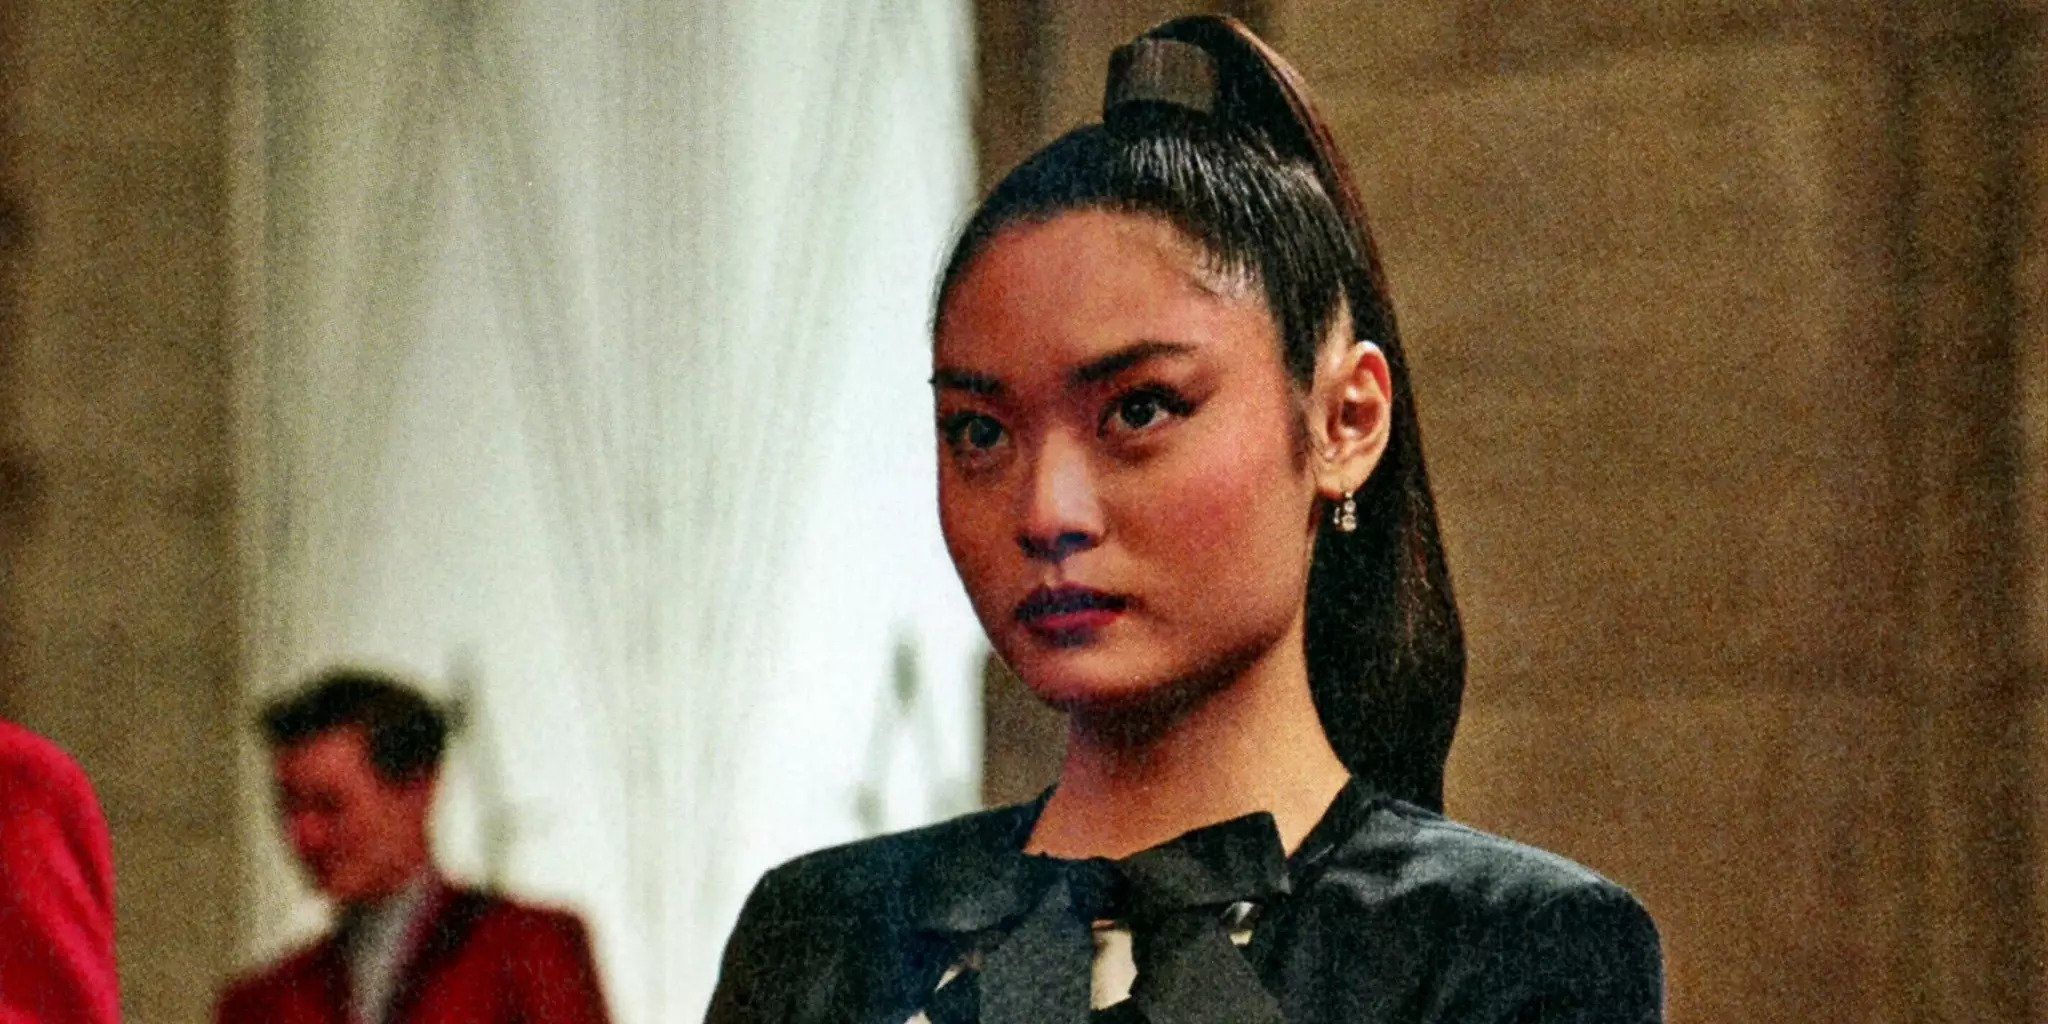 A still of the character Clemensia Dovecote, played by Ashley Liao, in The Hunger Games: The Ballad of Songbirds and Snakes